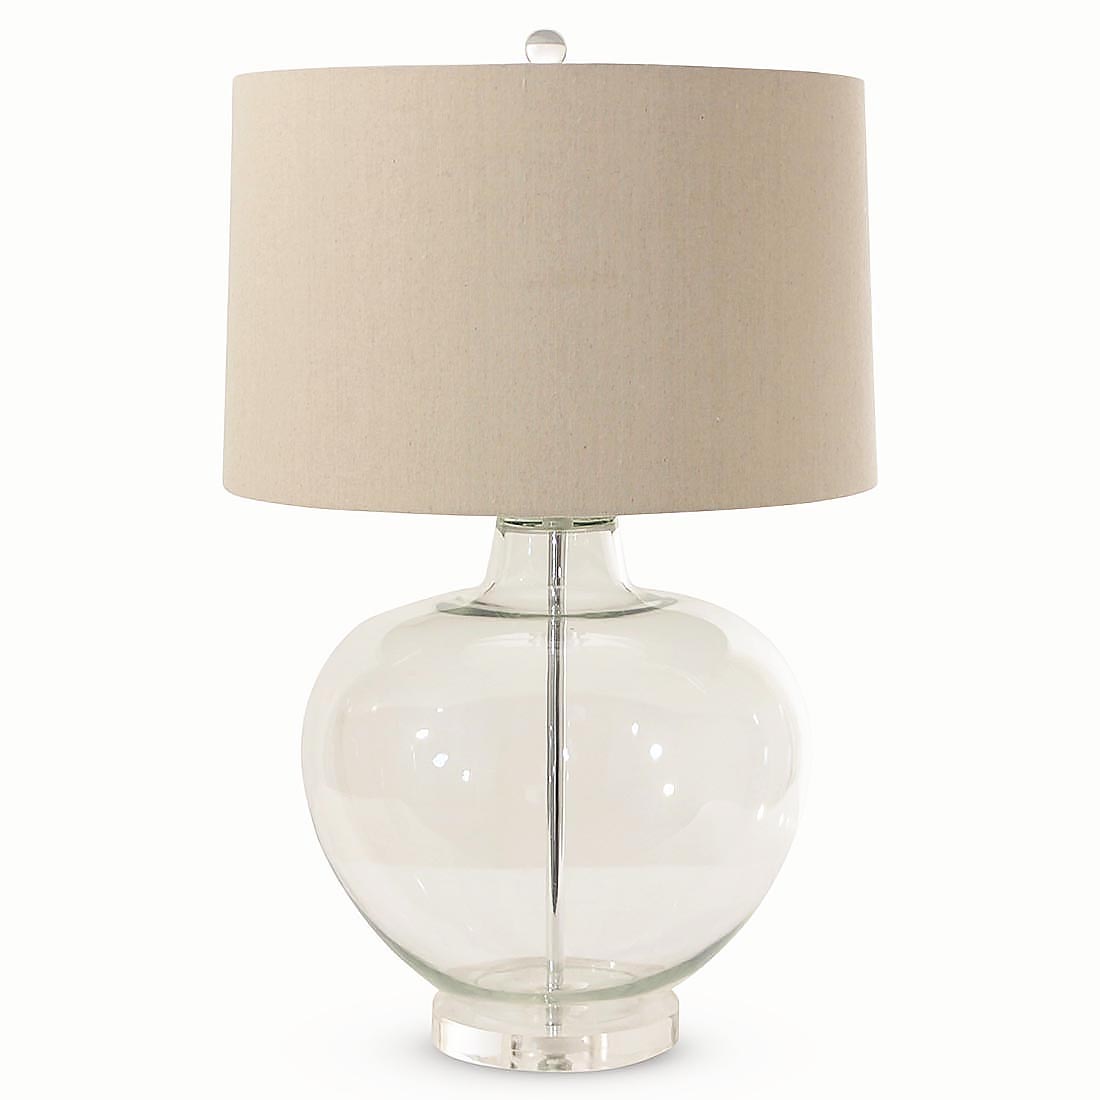 Glass Urn Table Lamp With Natural Shade, Large Urn Table Lamps